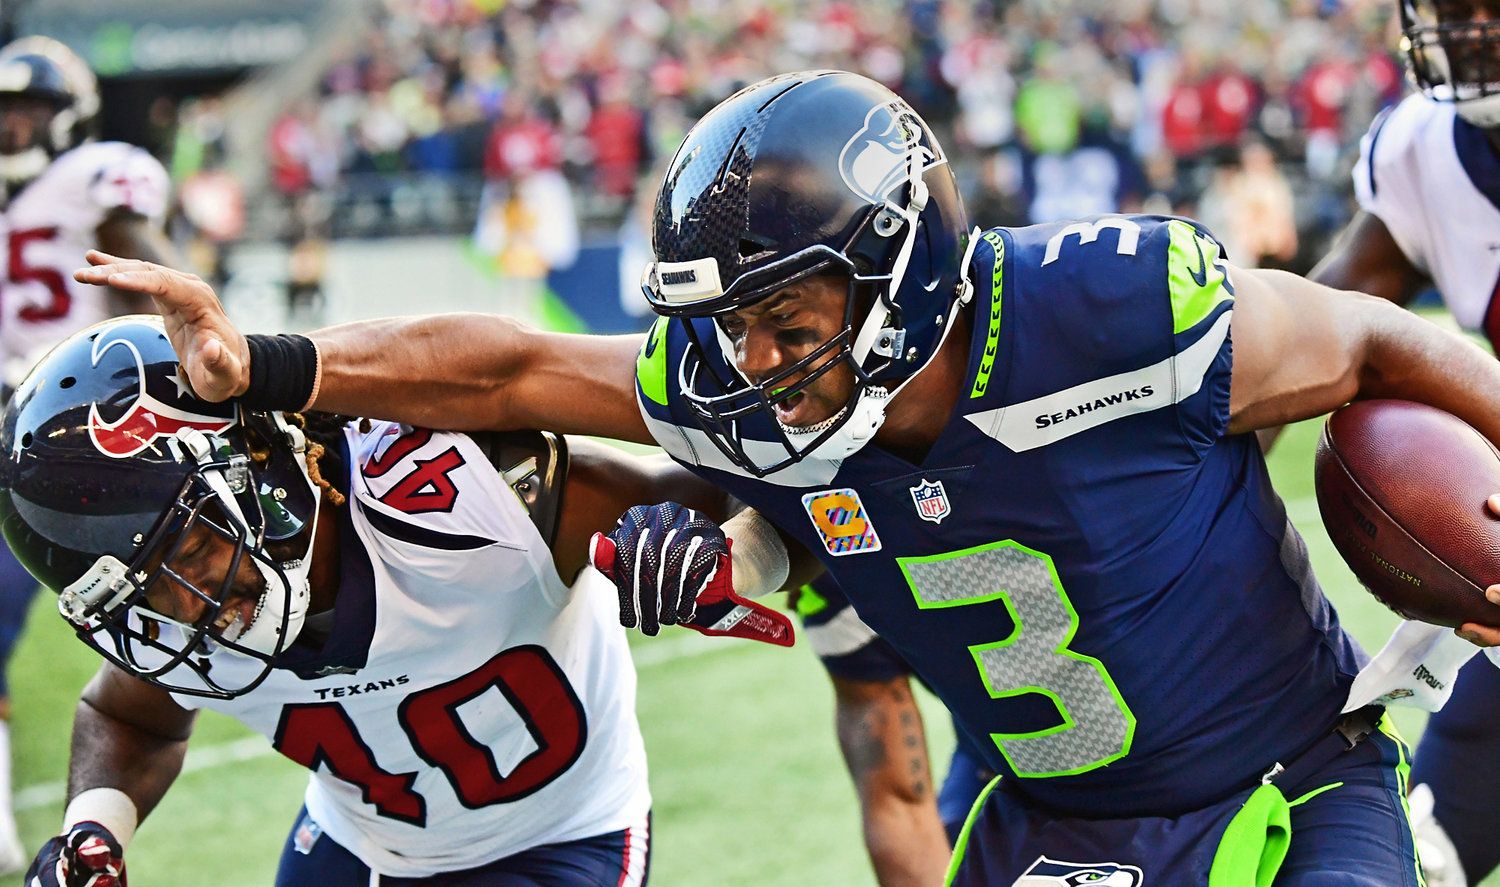 Seattle Seahawks quarterback Russell Wilson scrambles for good yardage before stiff-arming Houston Texans cornerback Marcus Williams to end the play in 2018.